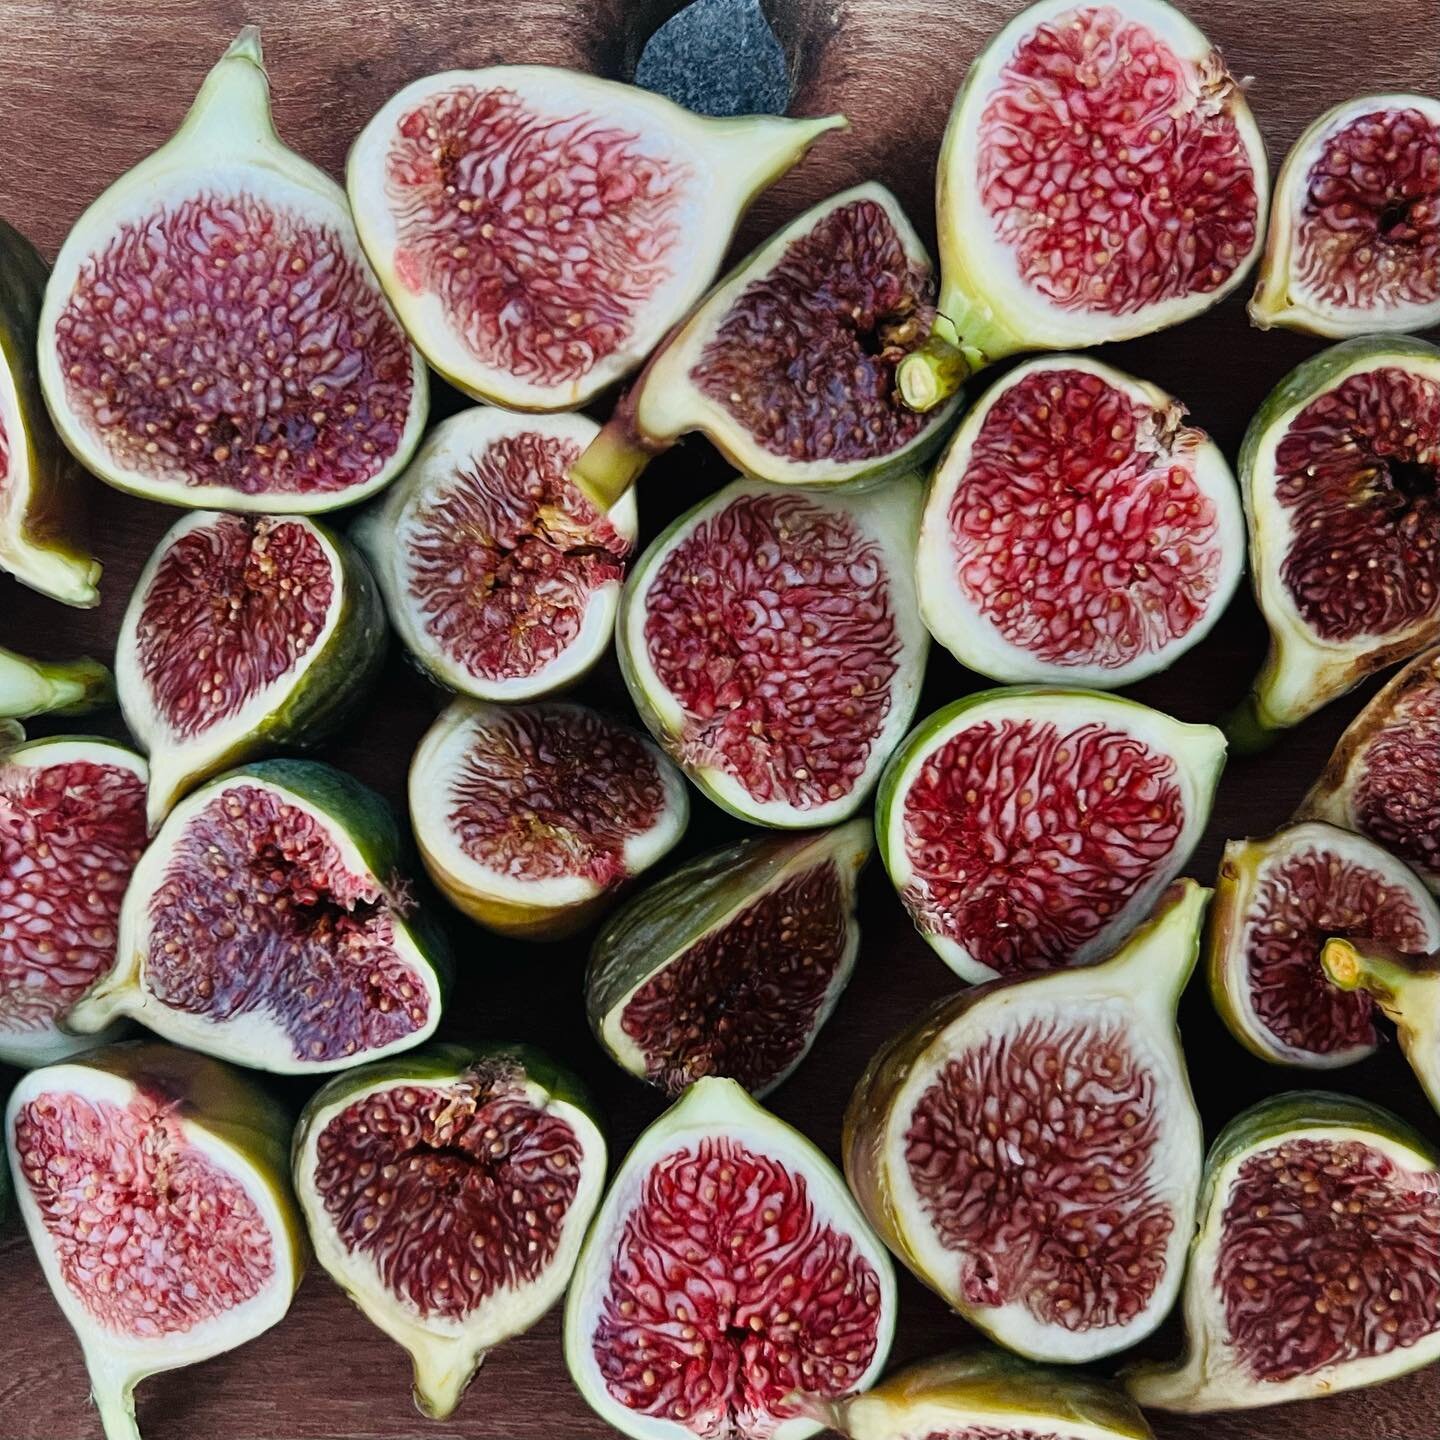 We have three wild fig trees on our property and in the 15 years we&rsquo;ve been here no one has ever eaten a fig from the tree. This year I paid special attention to catch them before the birds do and it was worth it! I never even liked figs but th